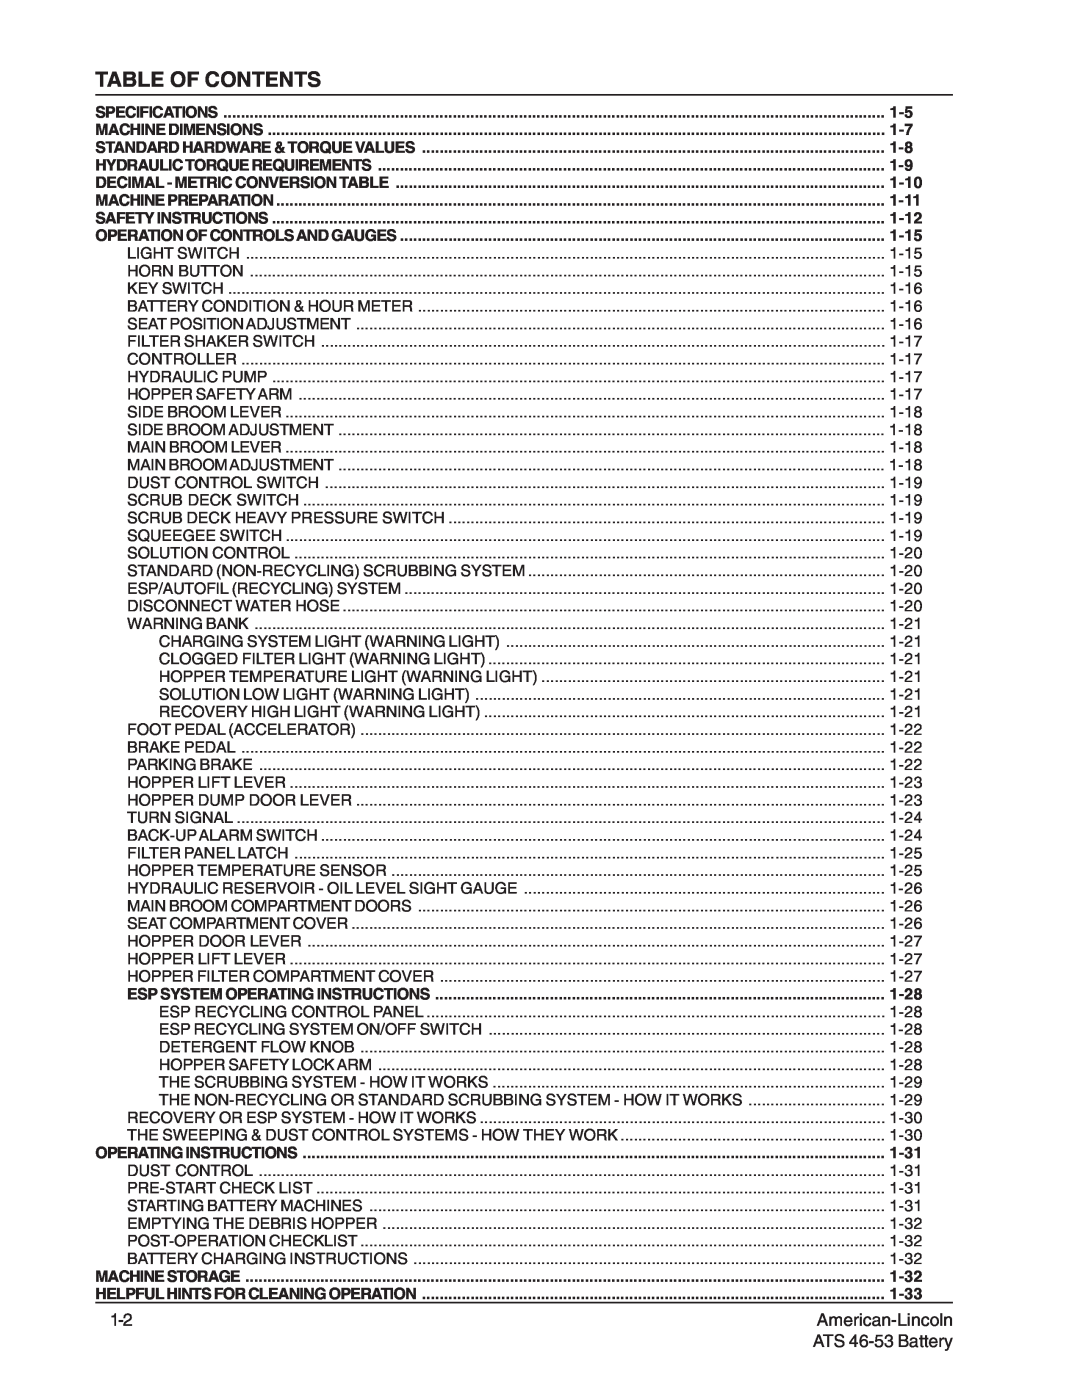 Nilfisk-ALTO 46/53 manual Table Of Contents, American-Lincoln, ATS 46-53Battery 